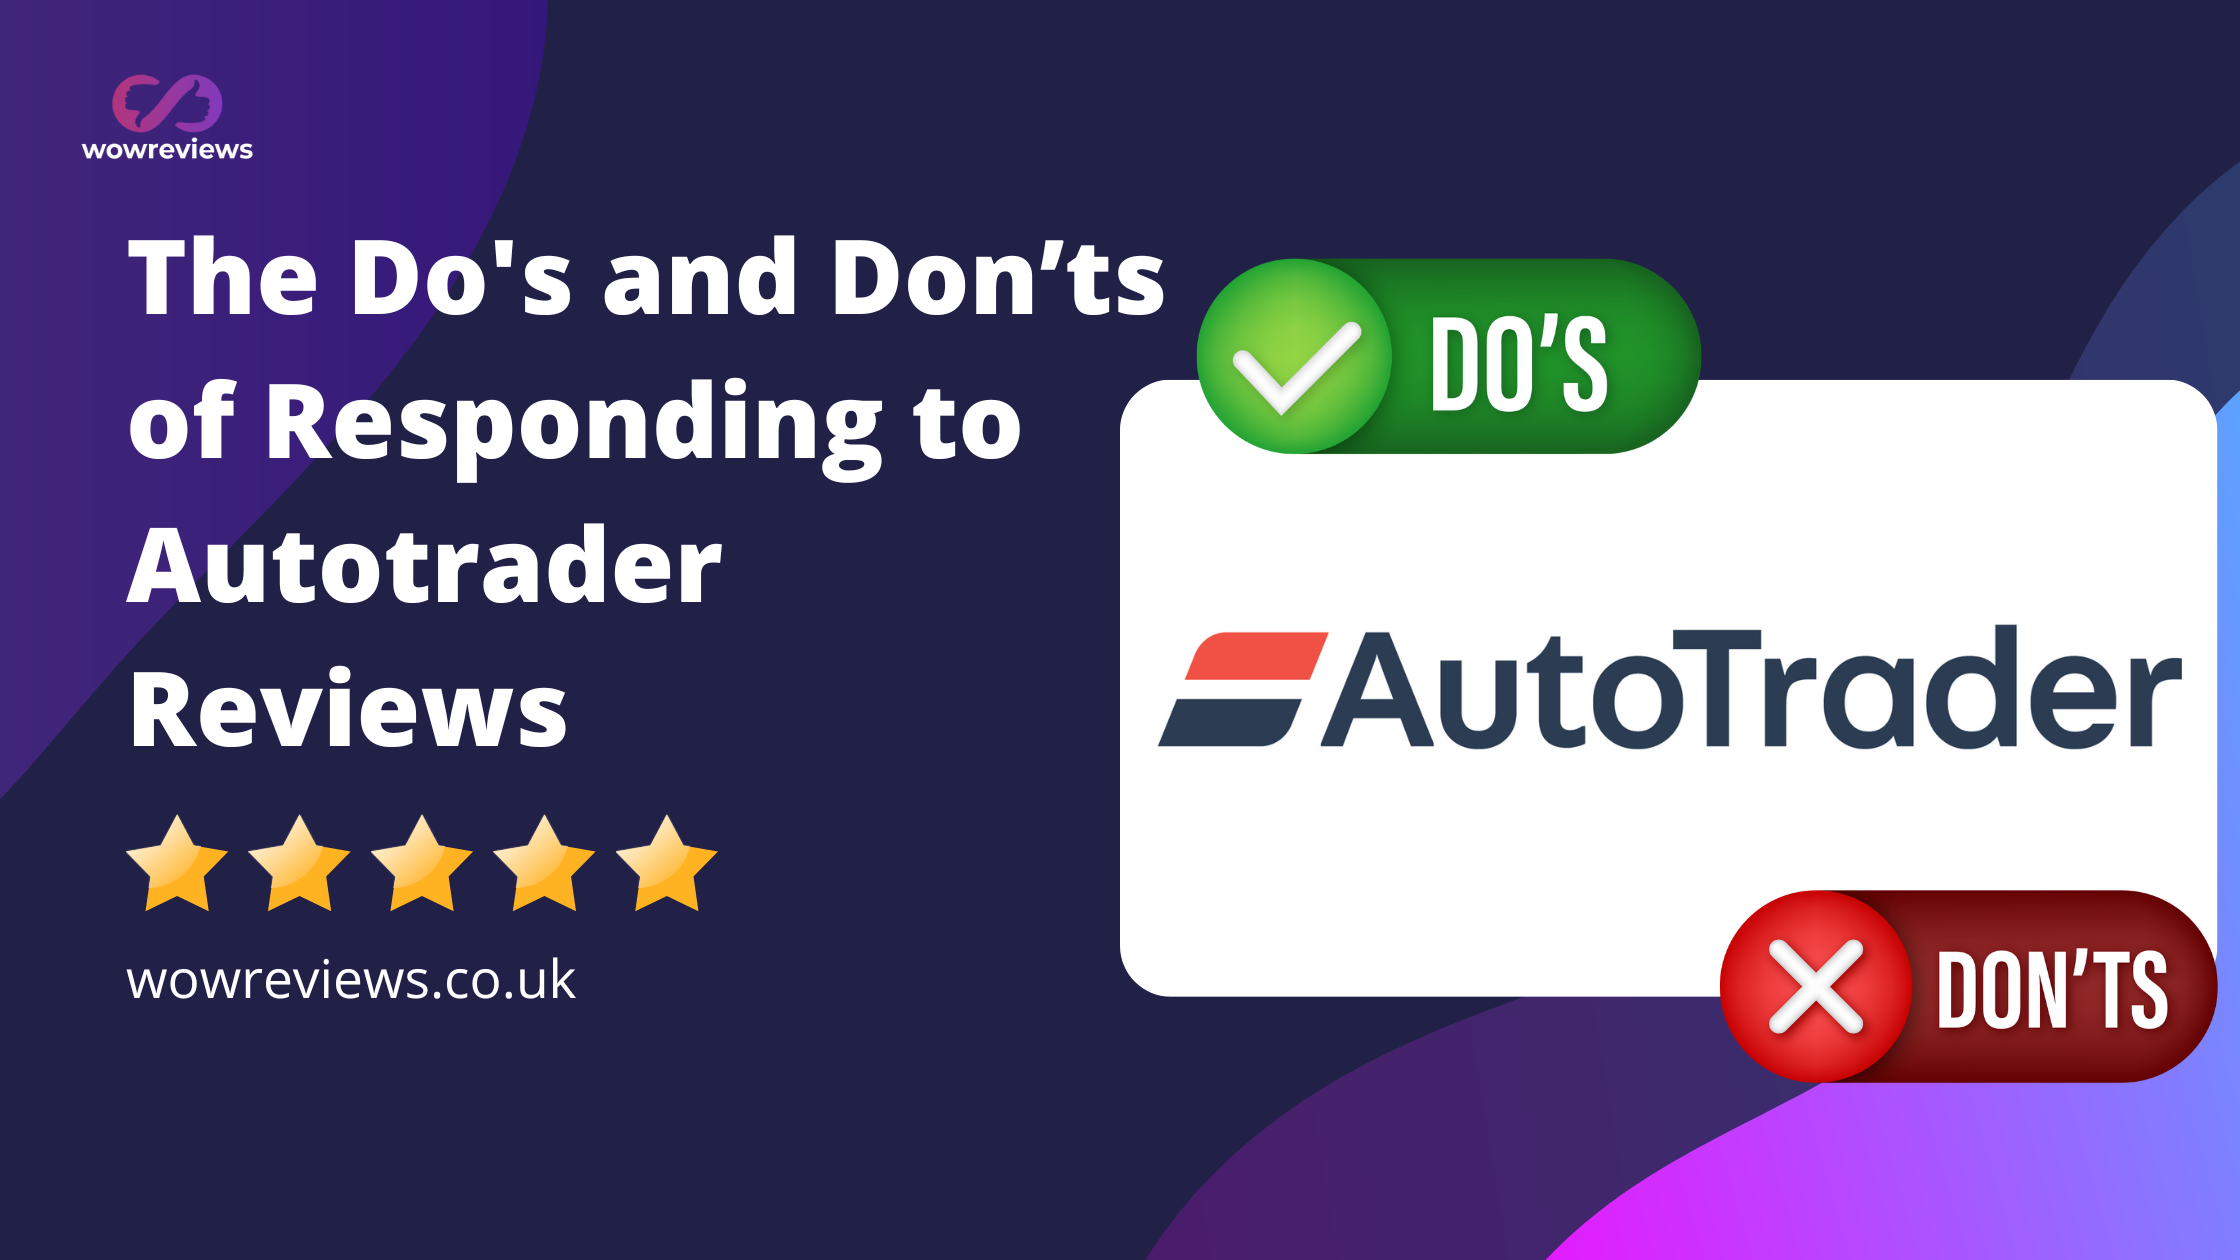 The Do's and Don’ts of Responding to Autotrader Reviews